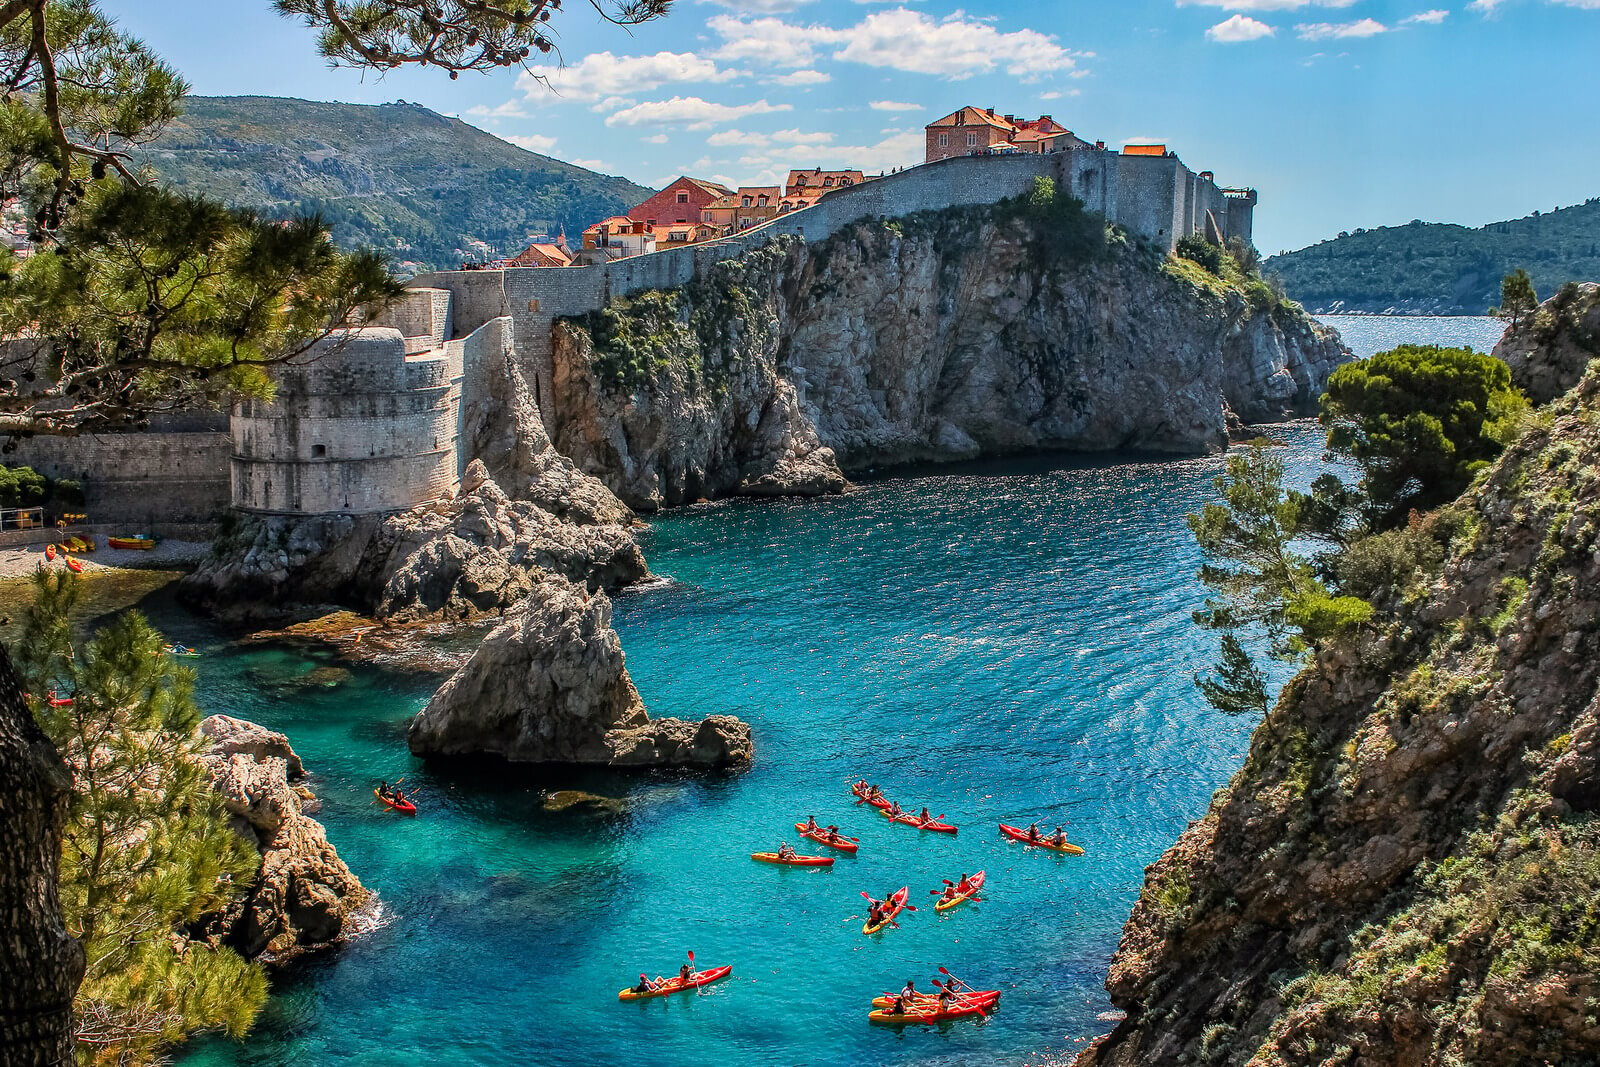 Kayakers in front of the city walls in Dubrovnik